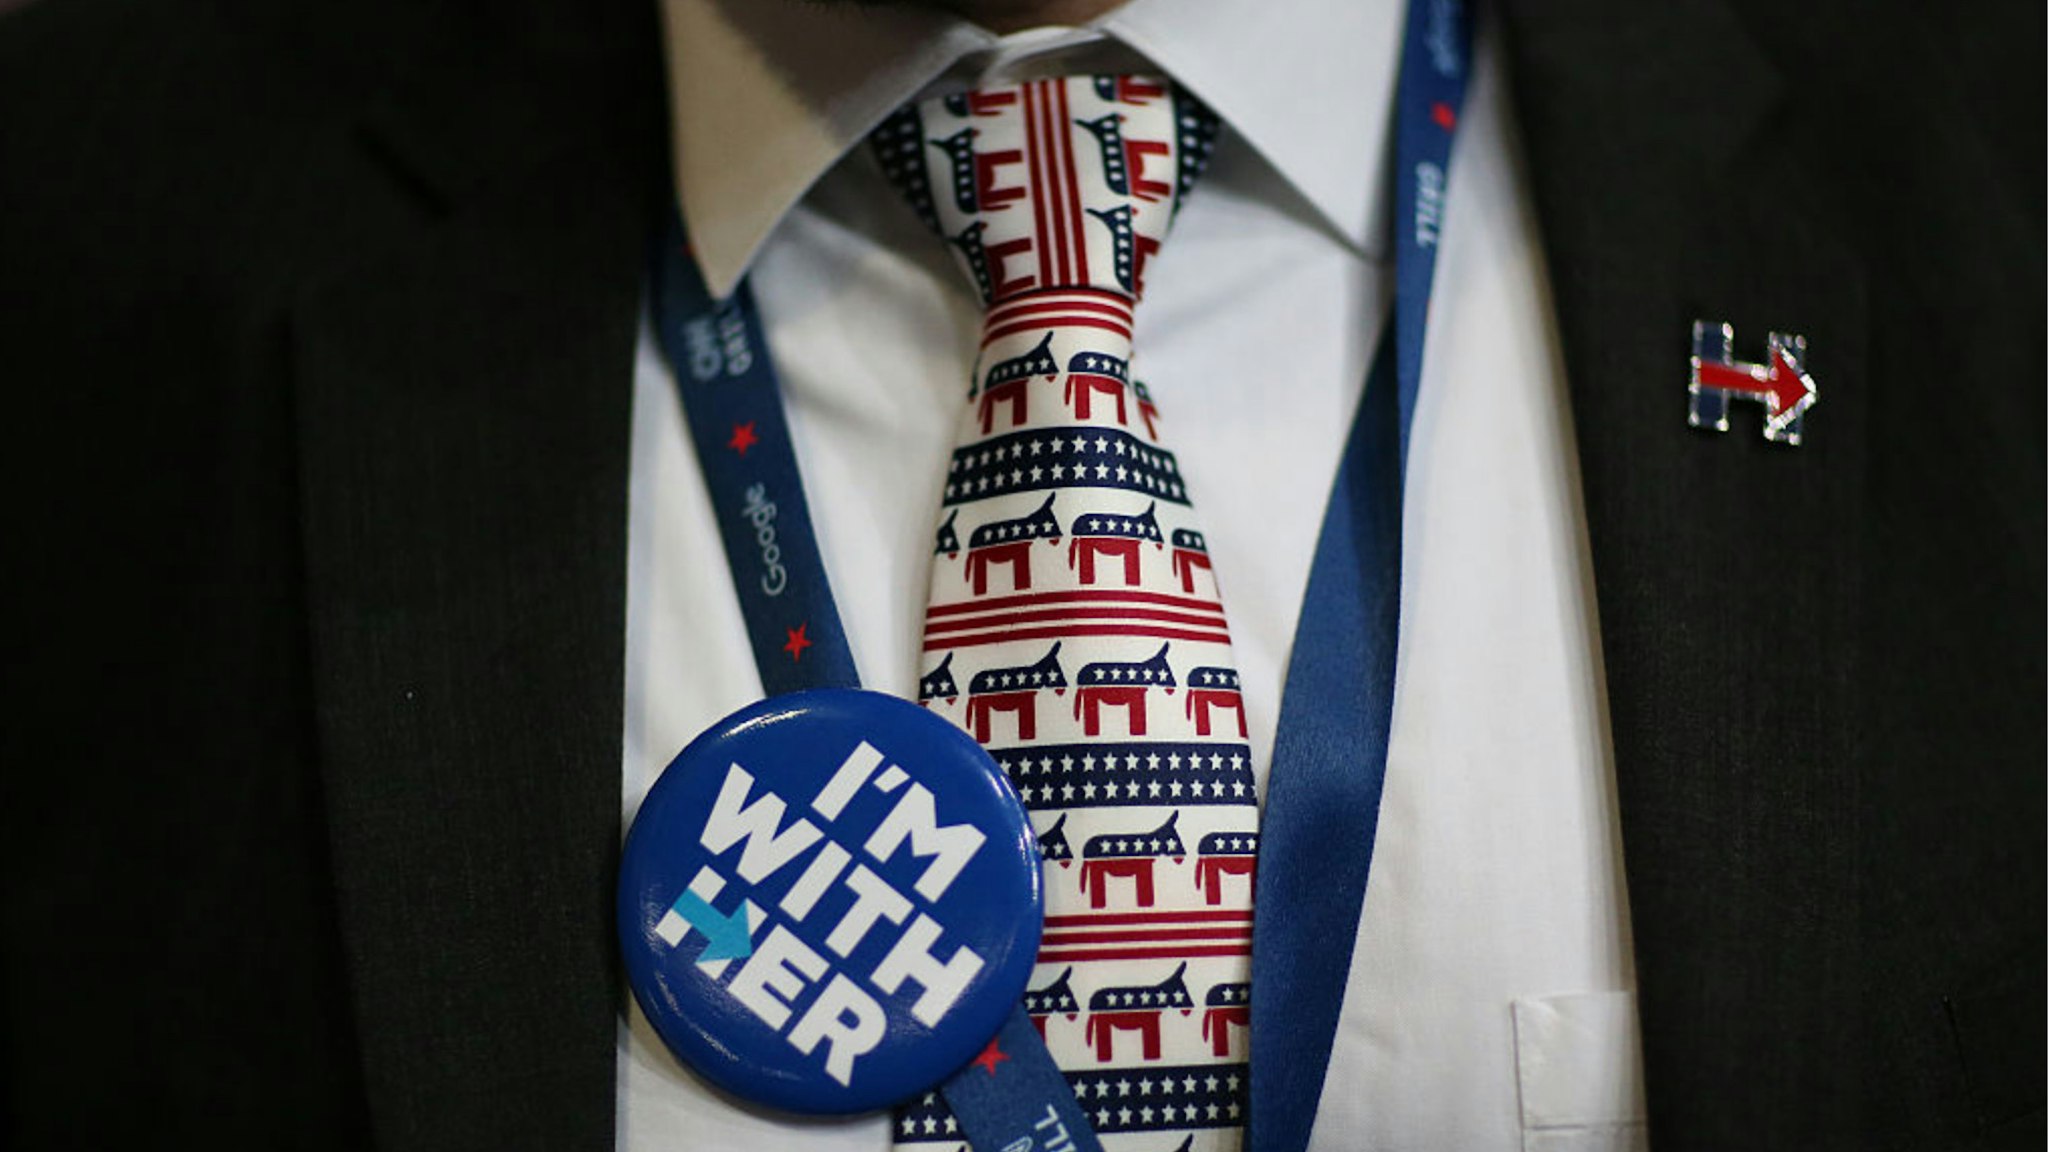 A delegate wears a Democratic party donkey themed tie and button reading "I'm With Her" during the Democratic National Convention (DNC) in Philadelphia, Pennsylvania, U.S., on Thursday, July 28, 2016.